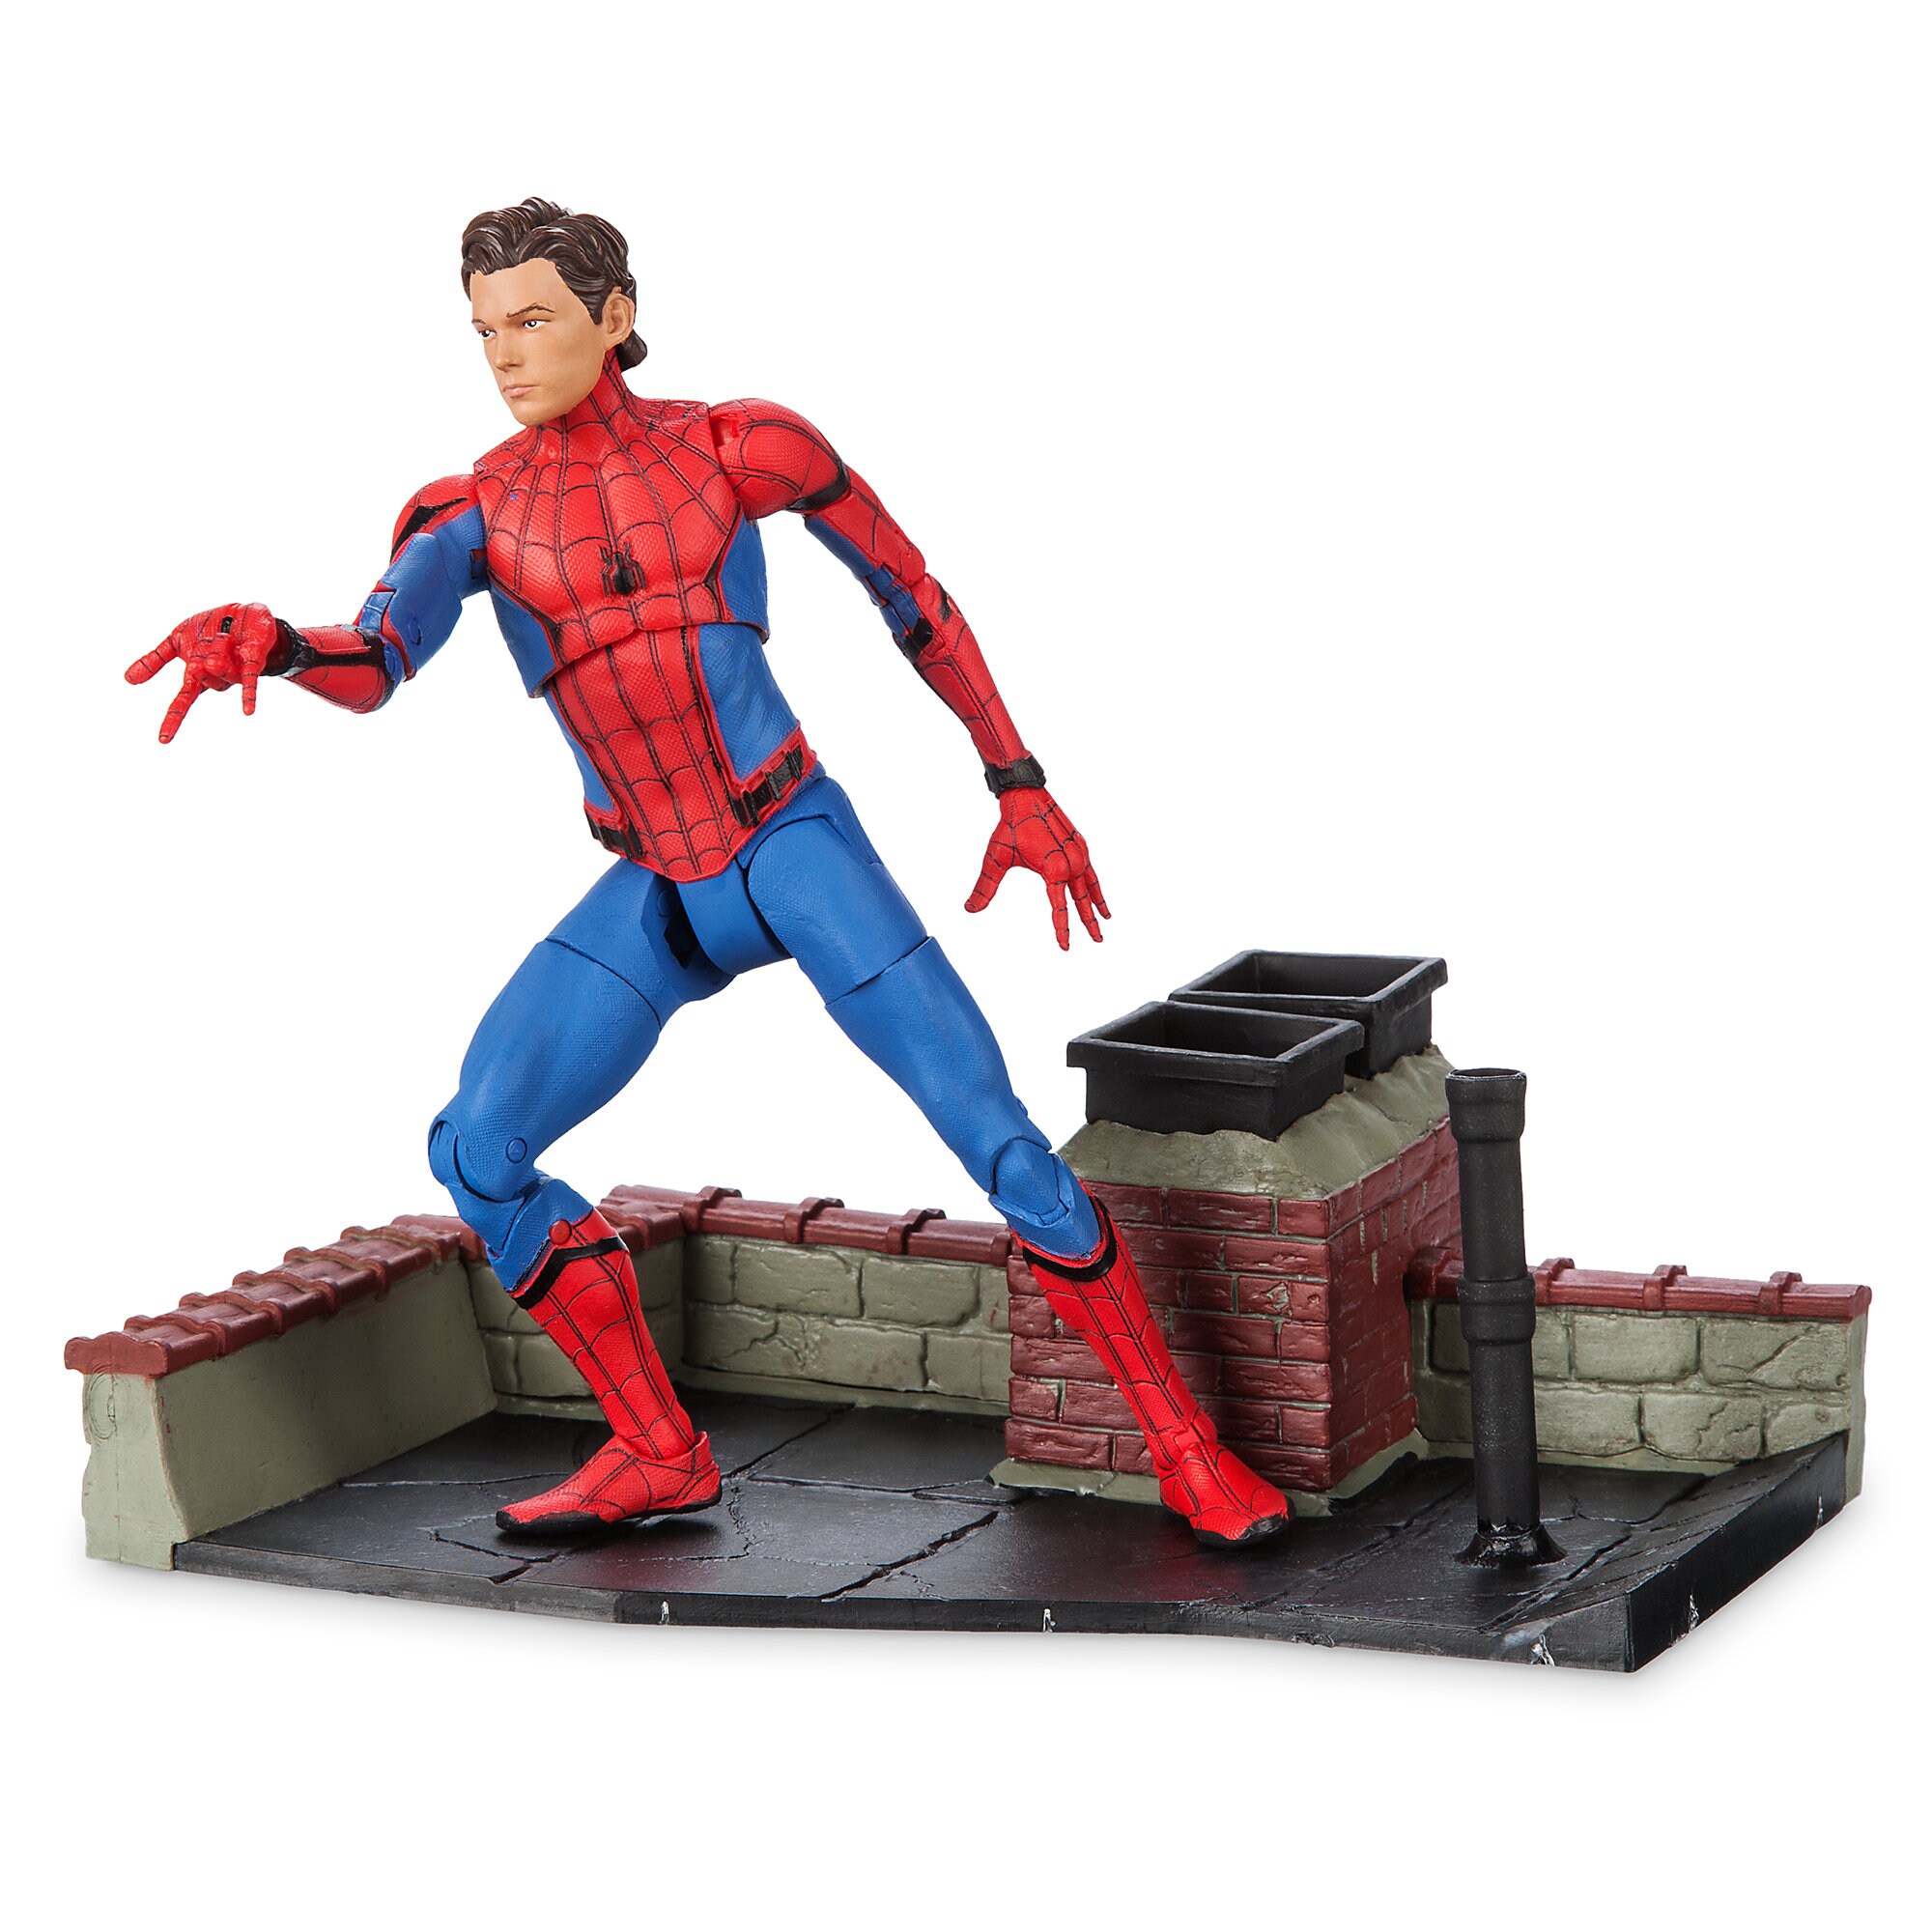 Spider-Man Action Figure - Marvel Select - Spider-Man: Homecoming - 7''